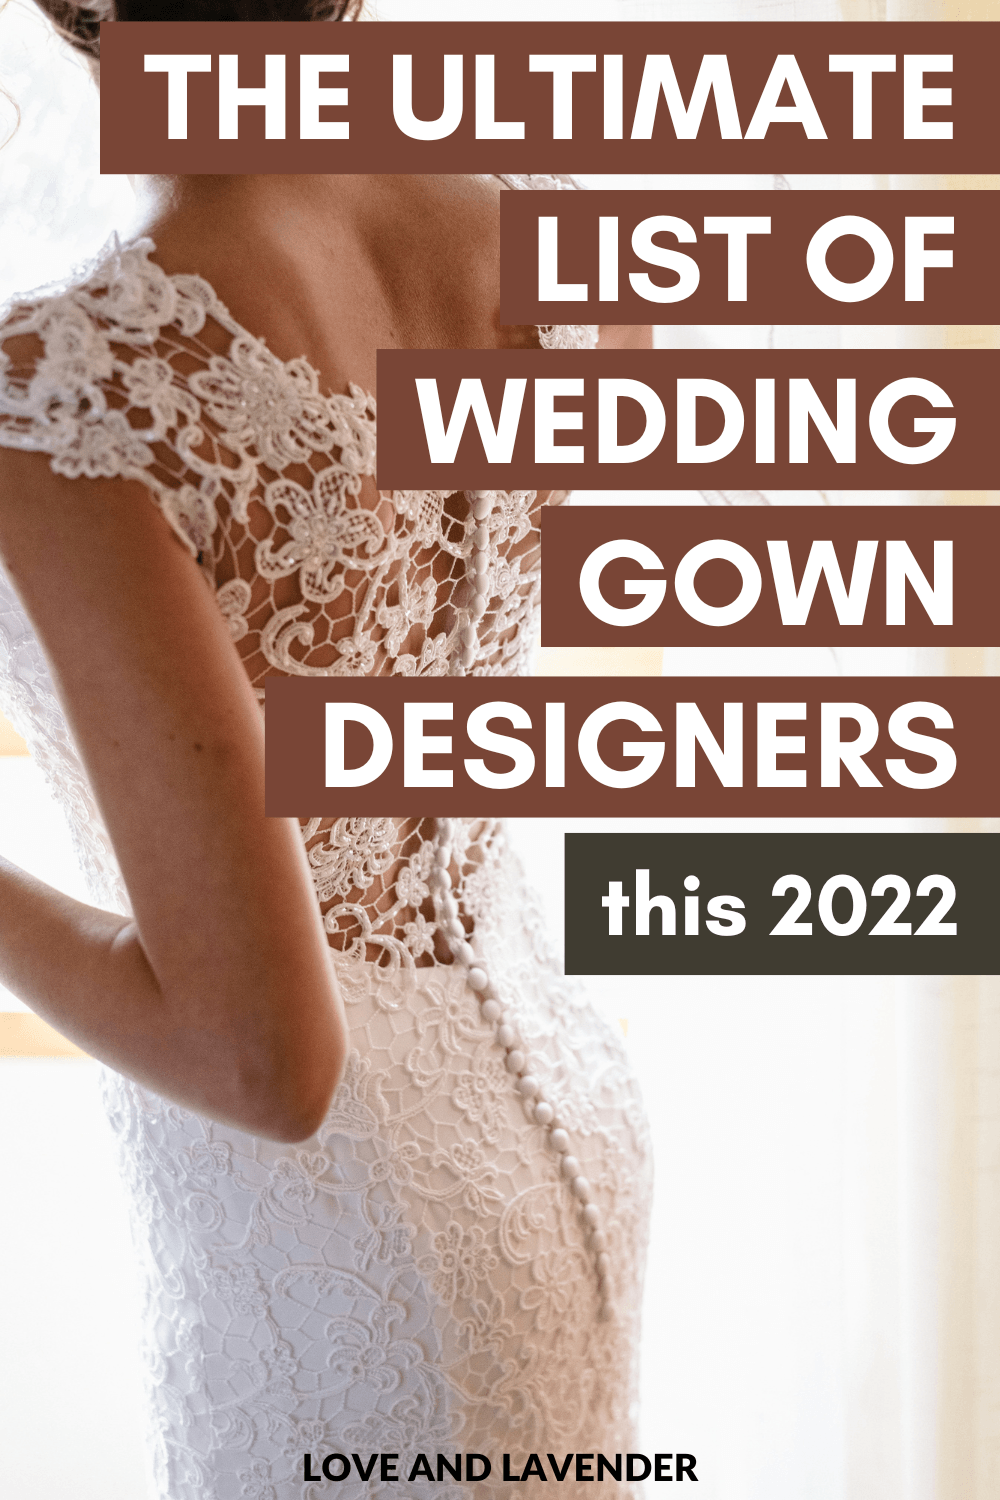 The Ultimate List of Wedding Gown Designers [2022 Edition]